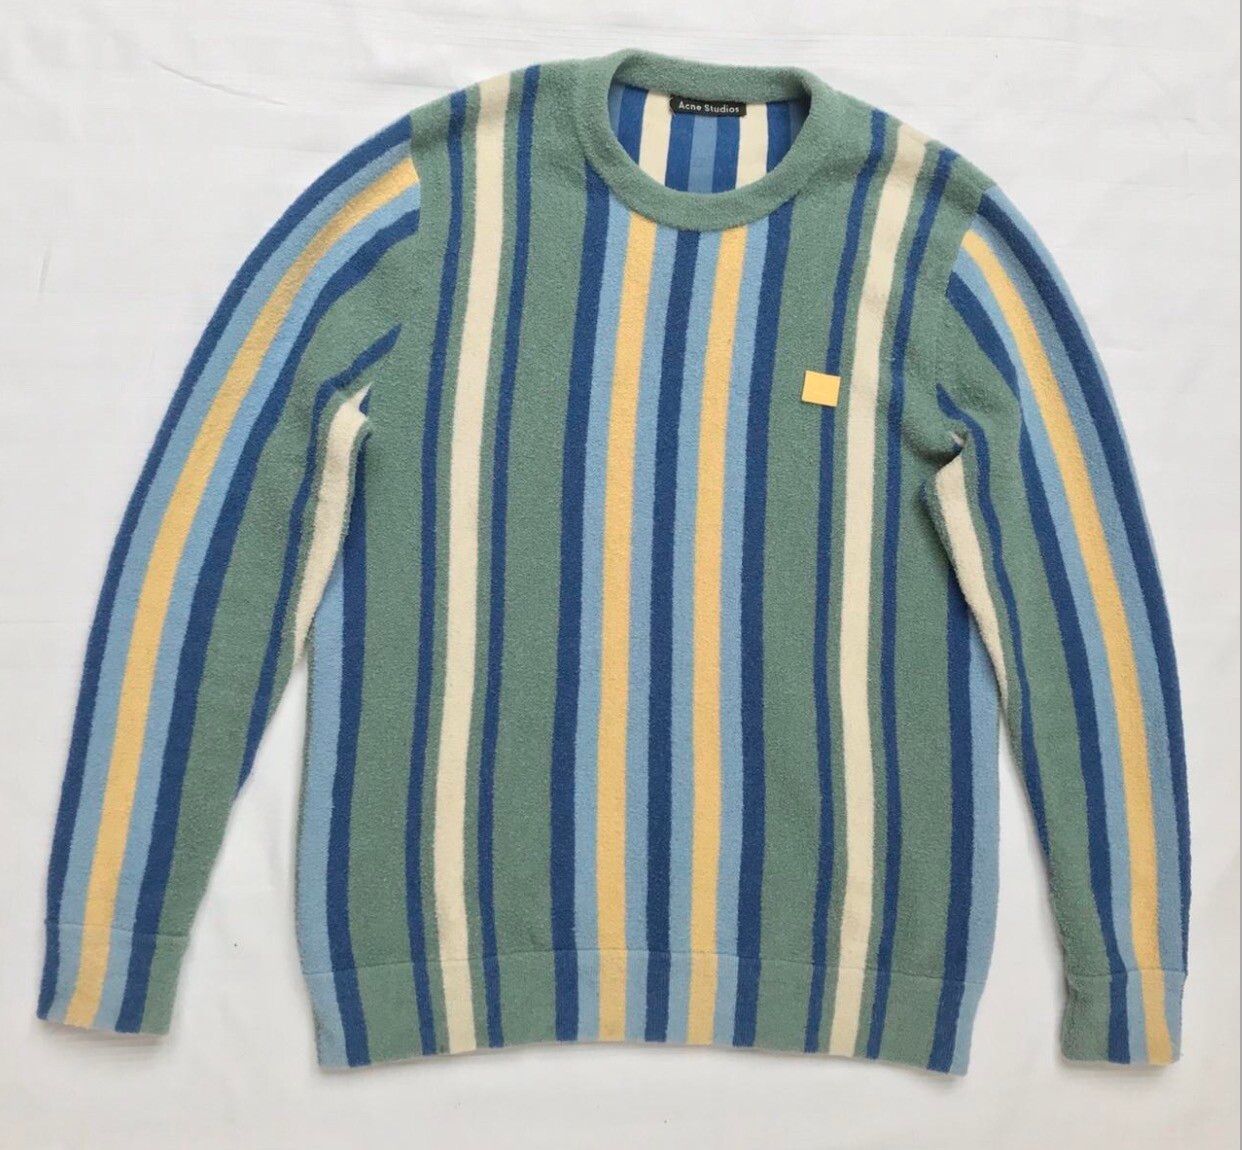 Acne Studios RARE GRAIL acne studios brushed terry sweater Size US M / EU 48-50 / 2 - 1 Preview